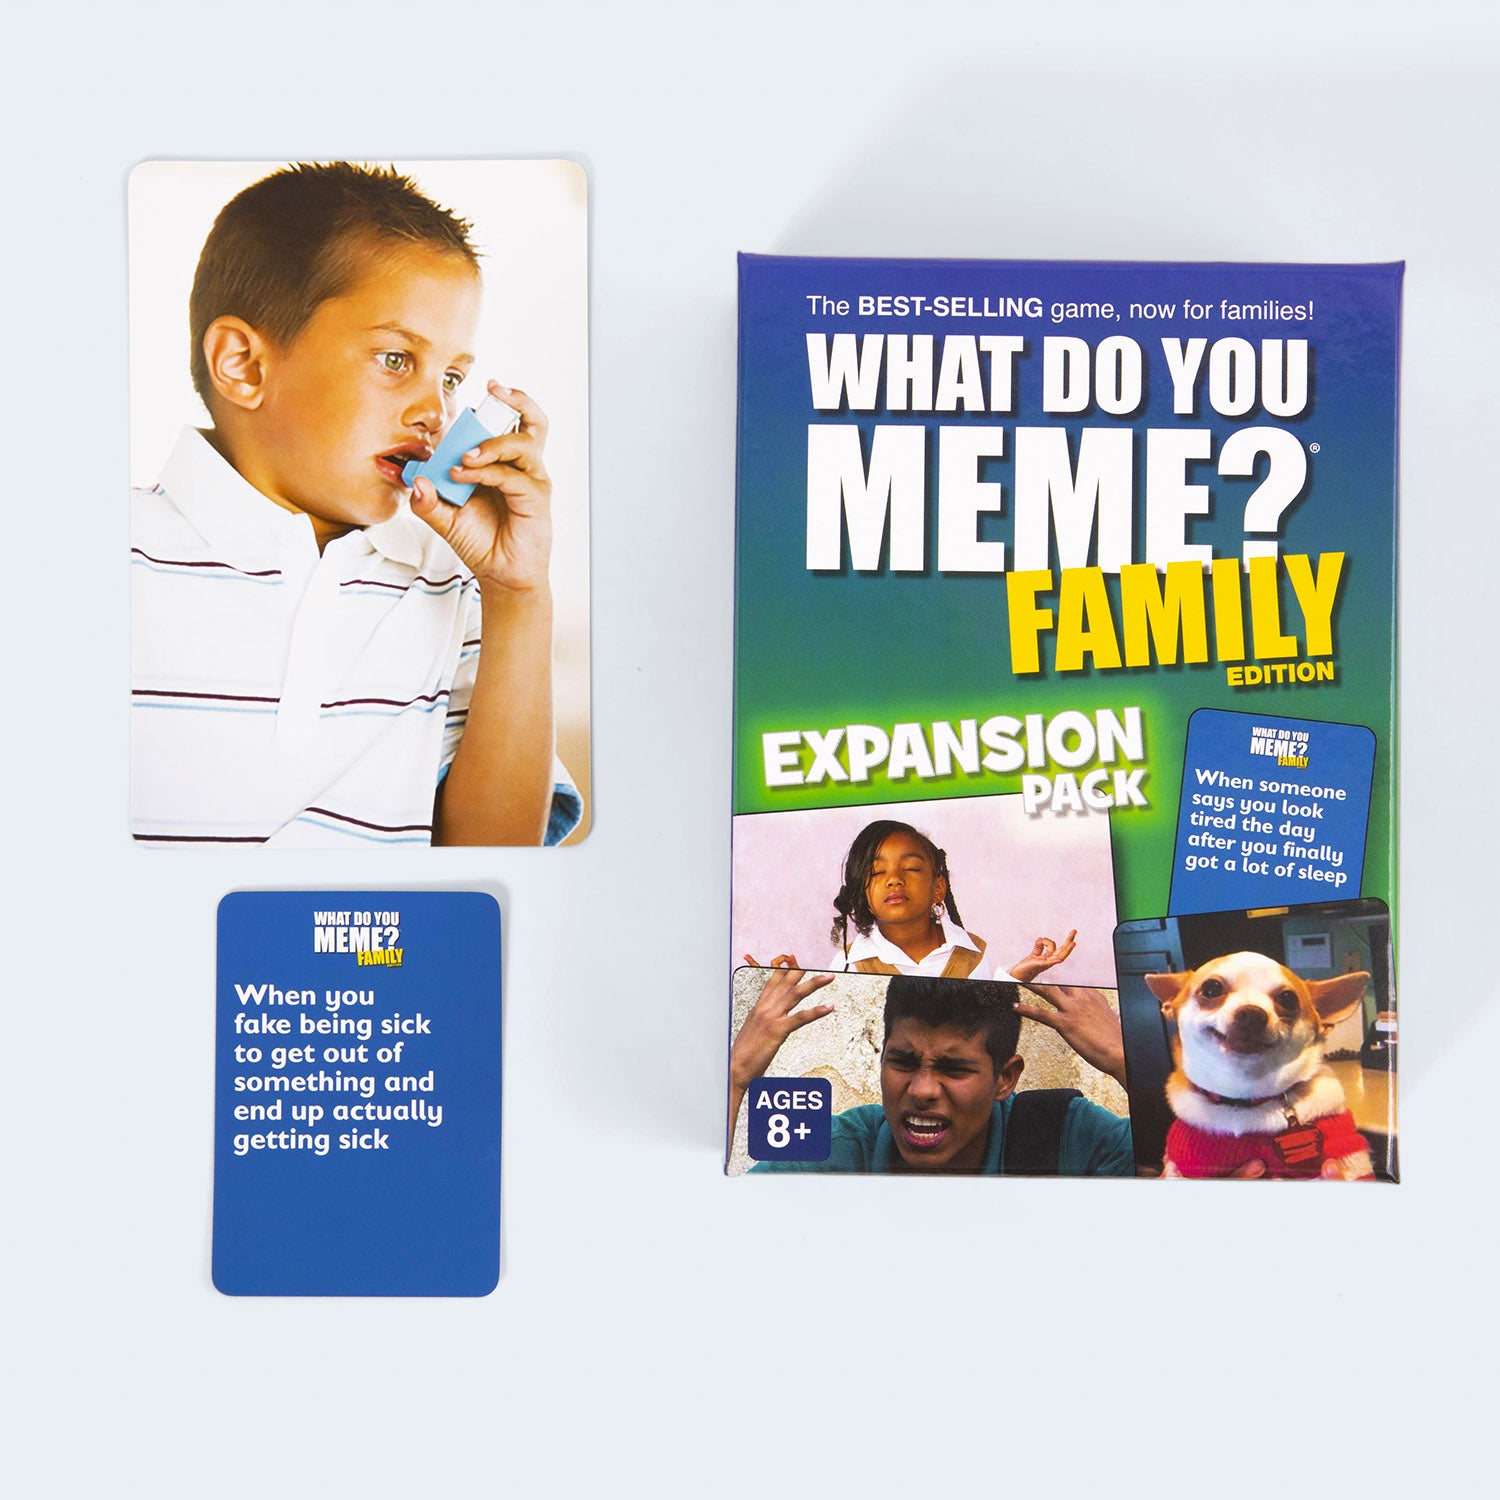 Sealed What Do You Meme? Family Edition Board Game